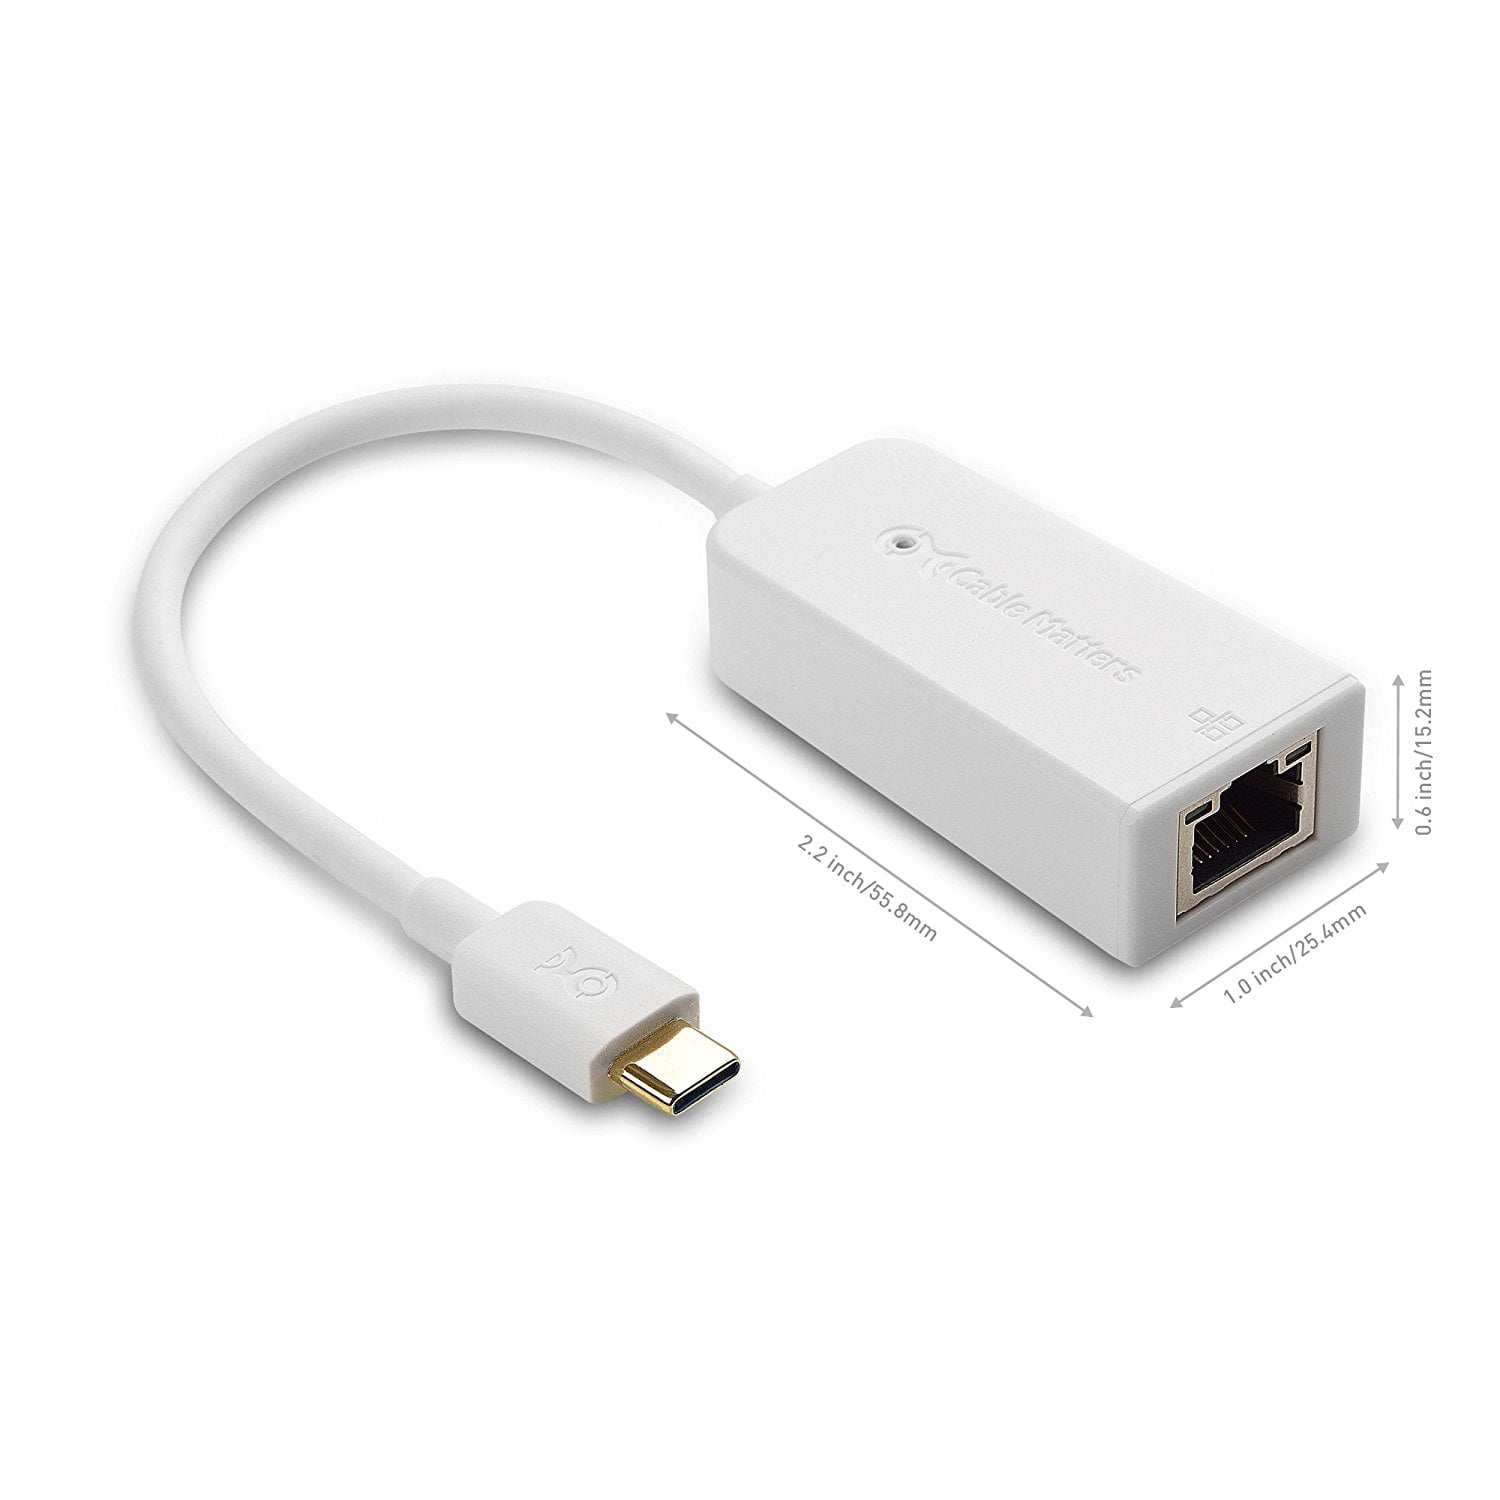  Cable Matters Plug & Play USB C to Ethernet Adapter with PXE,  MAC Address Clone (Thunderbolt to Ethernet Adapter, Gigabit Ethernet to USB  C) in Gray - Compatible with MacBook Pro